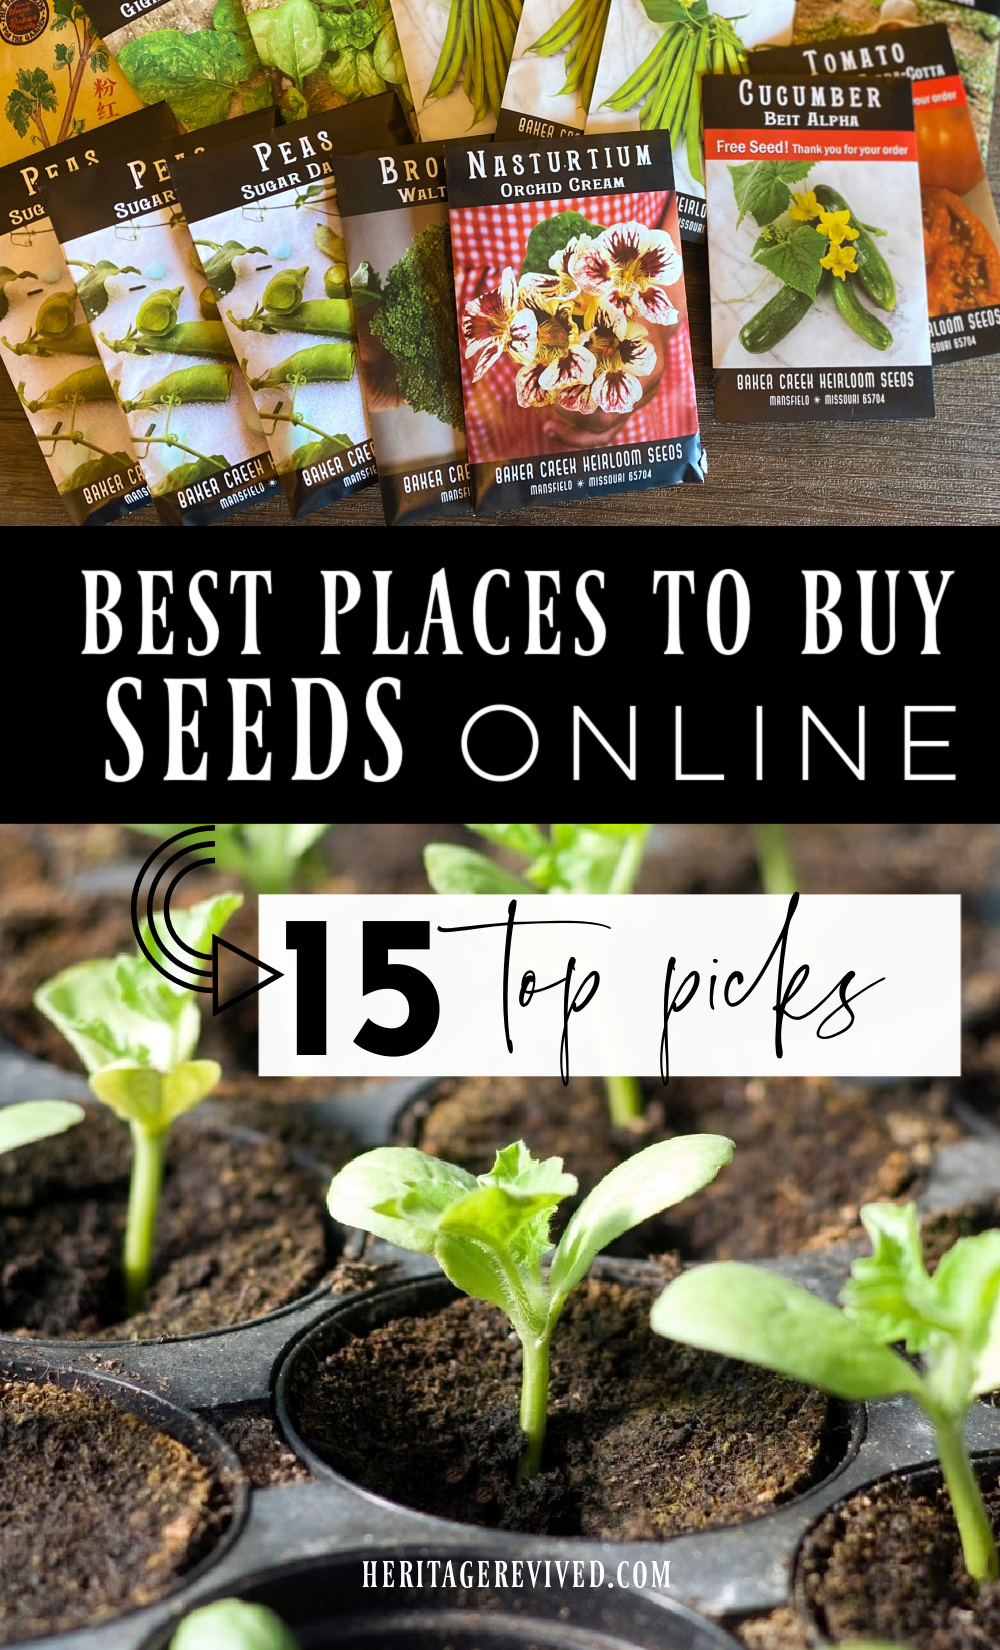 Graphic with picture of seed packets and seedlings, with text overlay "Best places to buy seeds online -- 15 top picks"